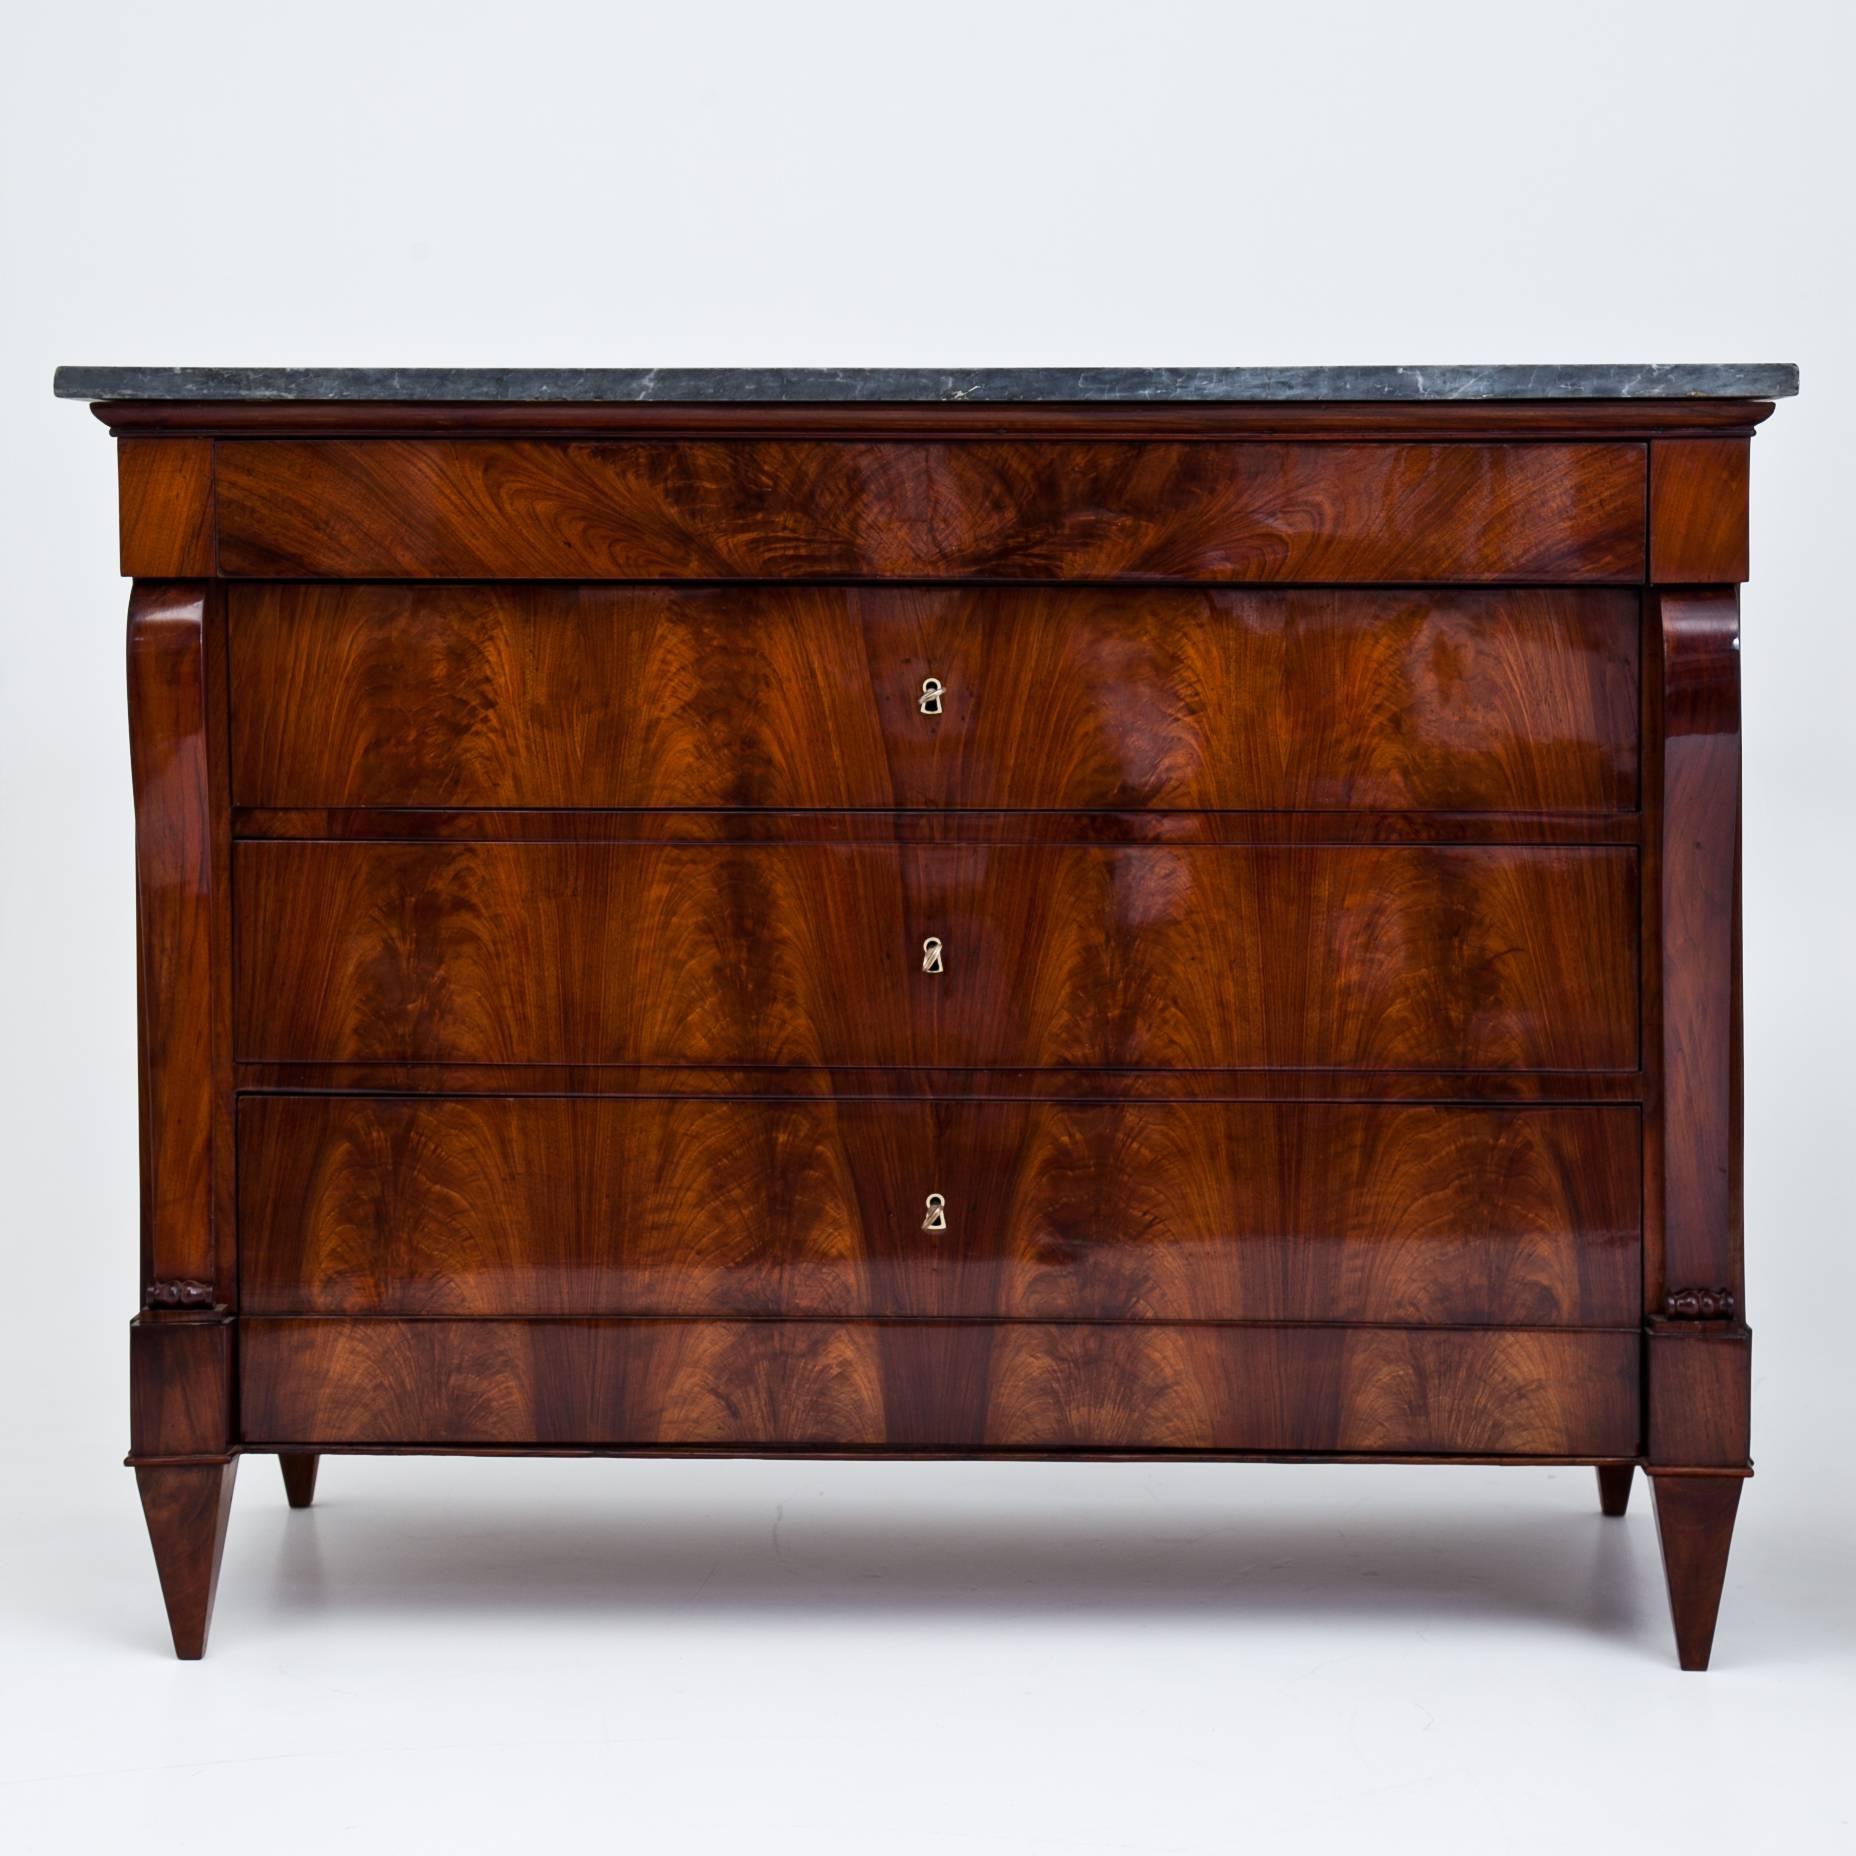 Early 19th Century Italian Walnut Chests of Drawers, circa 1825